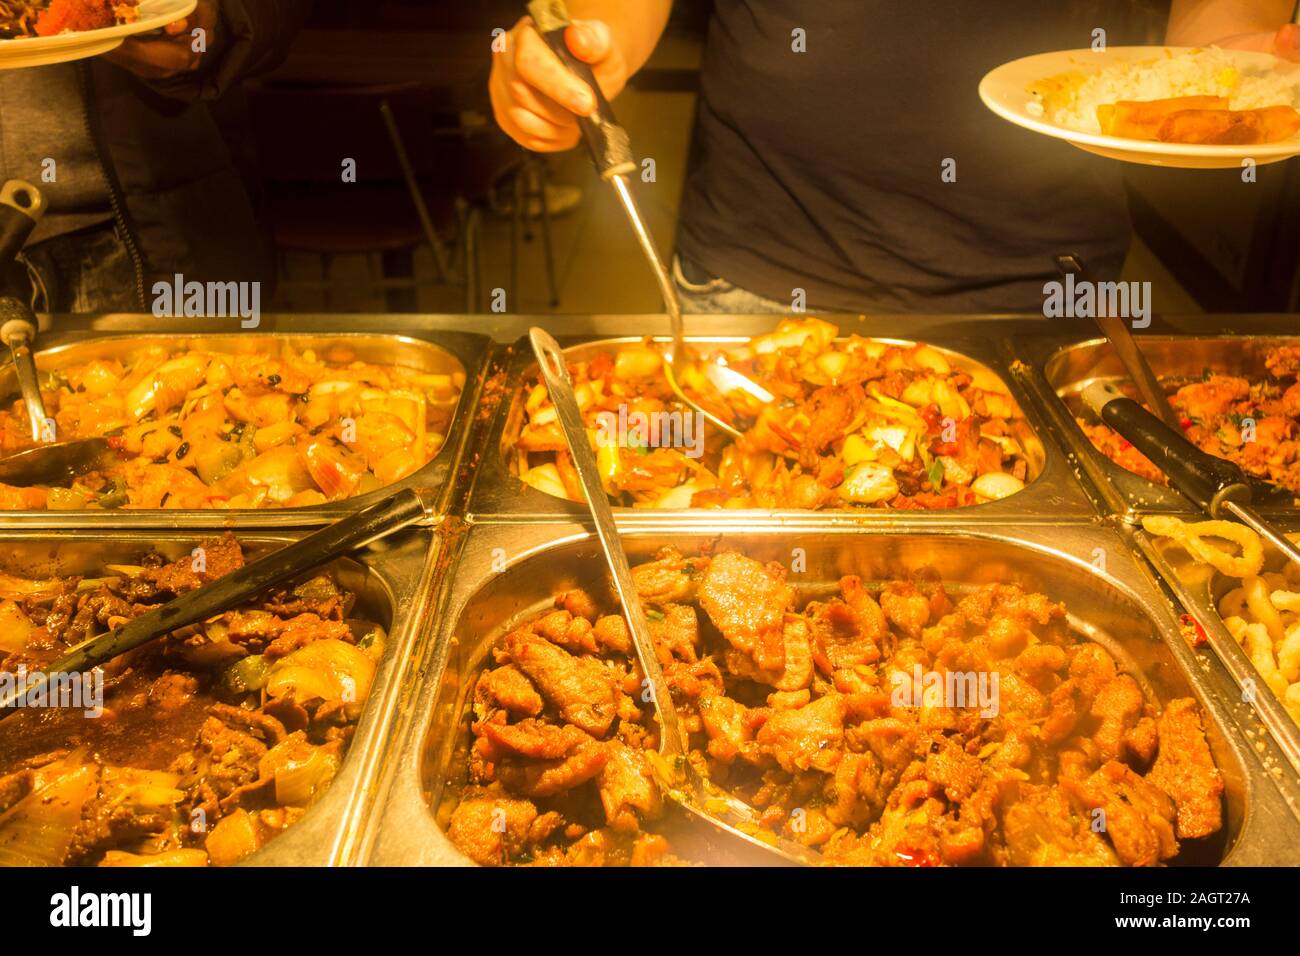 Customers serving themselves in a Chinese buffet restaurant in Chinatown, Soho, London, UK Stock Photo